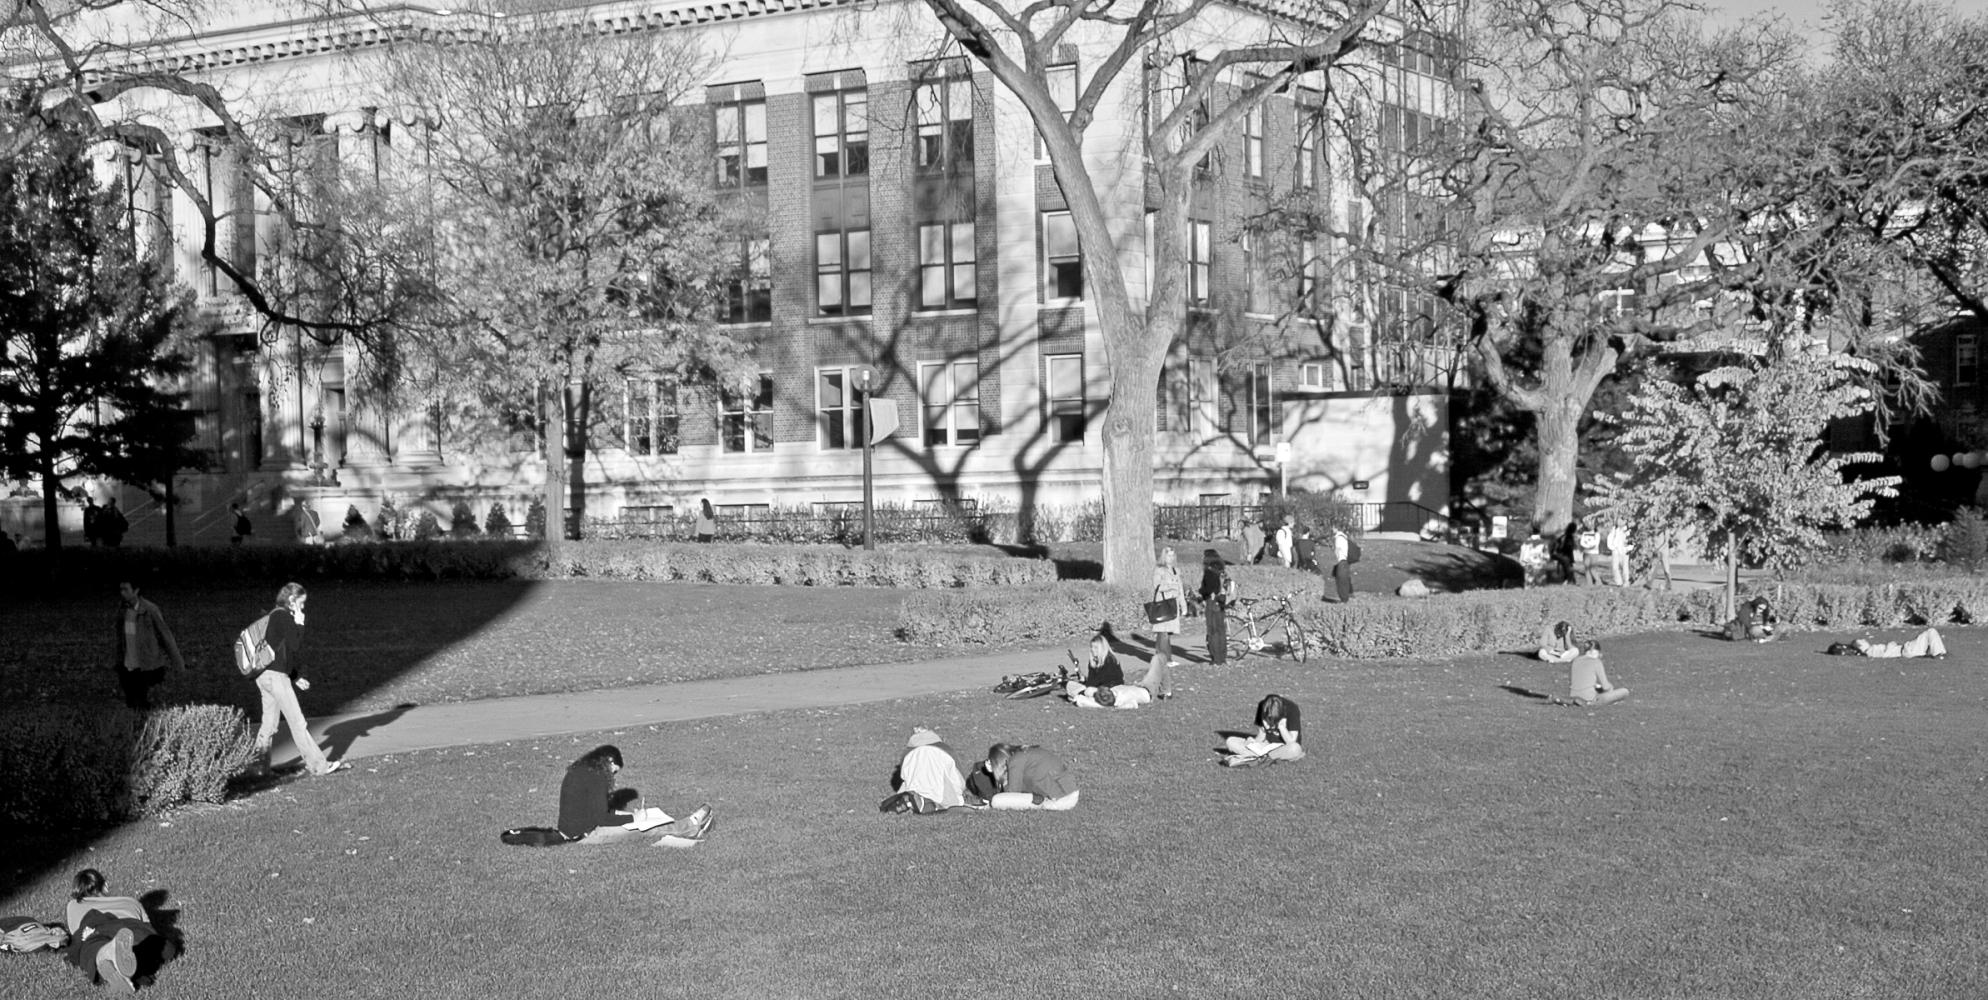 Black and white image of a college campus quad